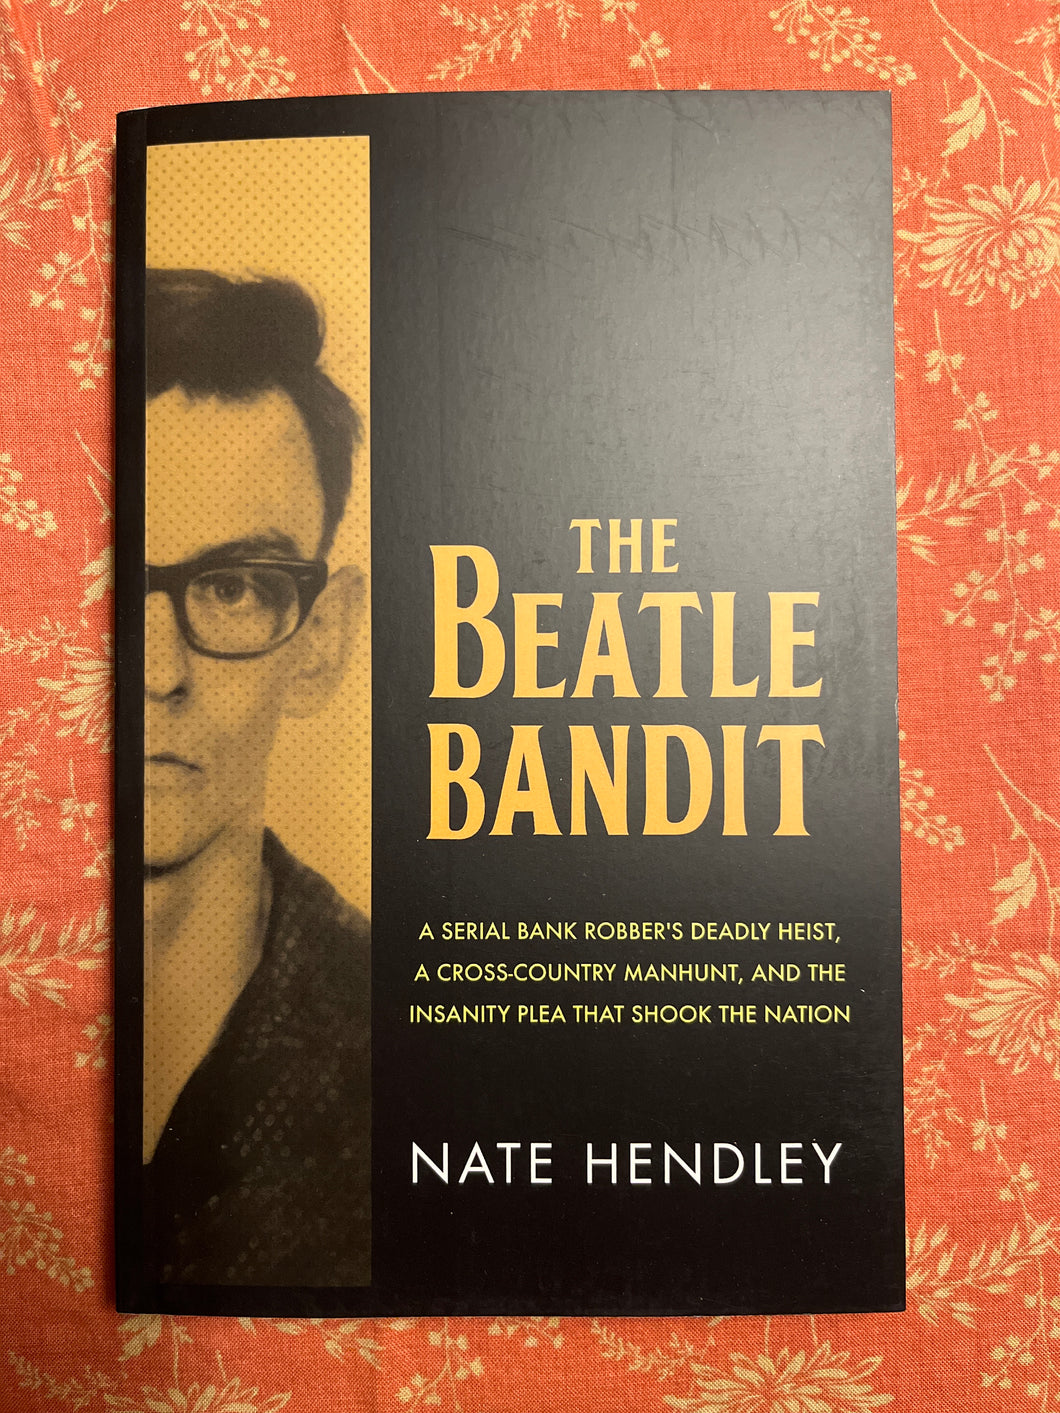 The Beatle Bandit: A Serial Bank Robber's Deadly Heist, A Cross-Country Manhunt, And The Insanity Plea That Shook The Nation